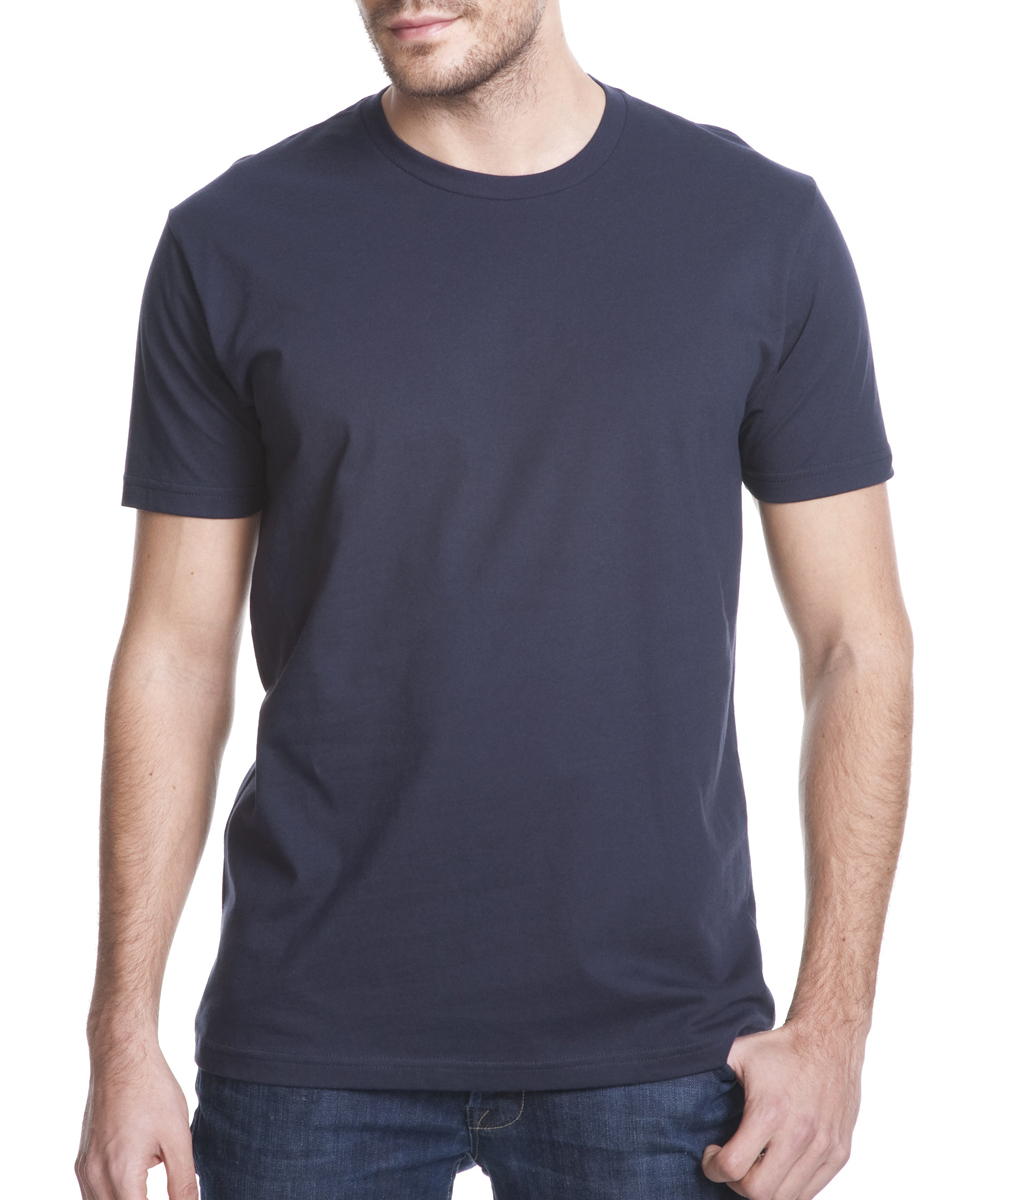 N3600 Next Level Premium Fitted Short-Sleeve Crew Neck T-Shirt